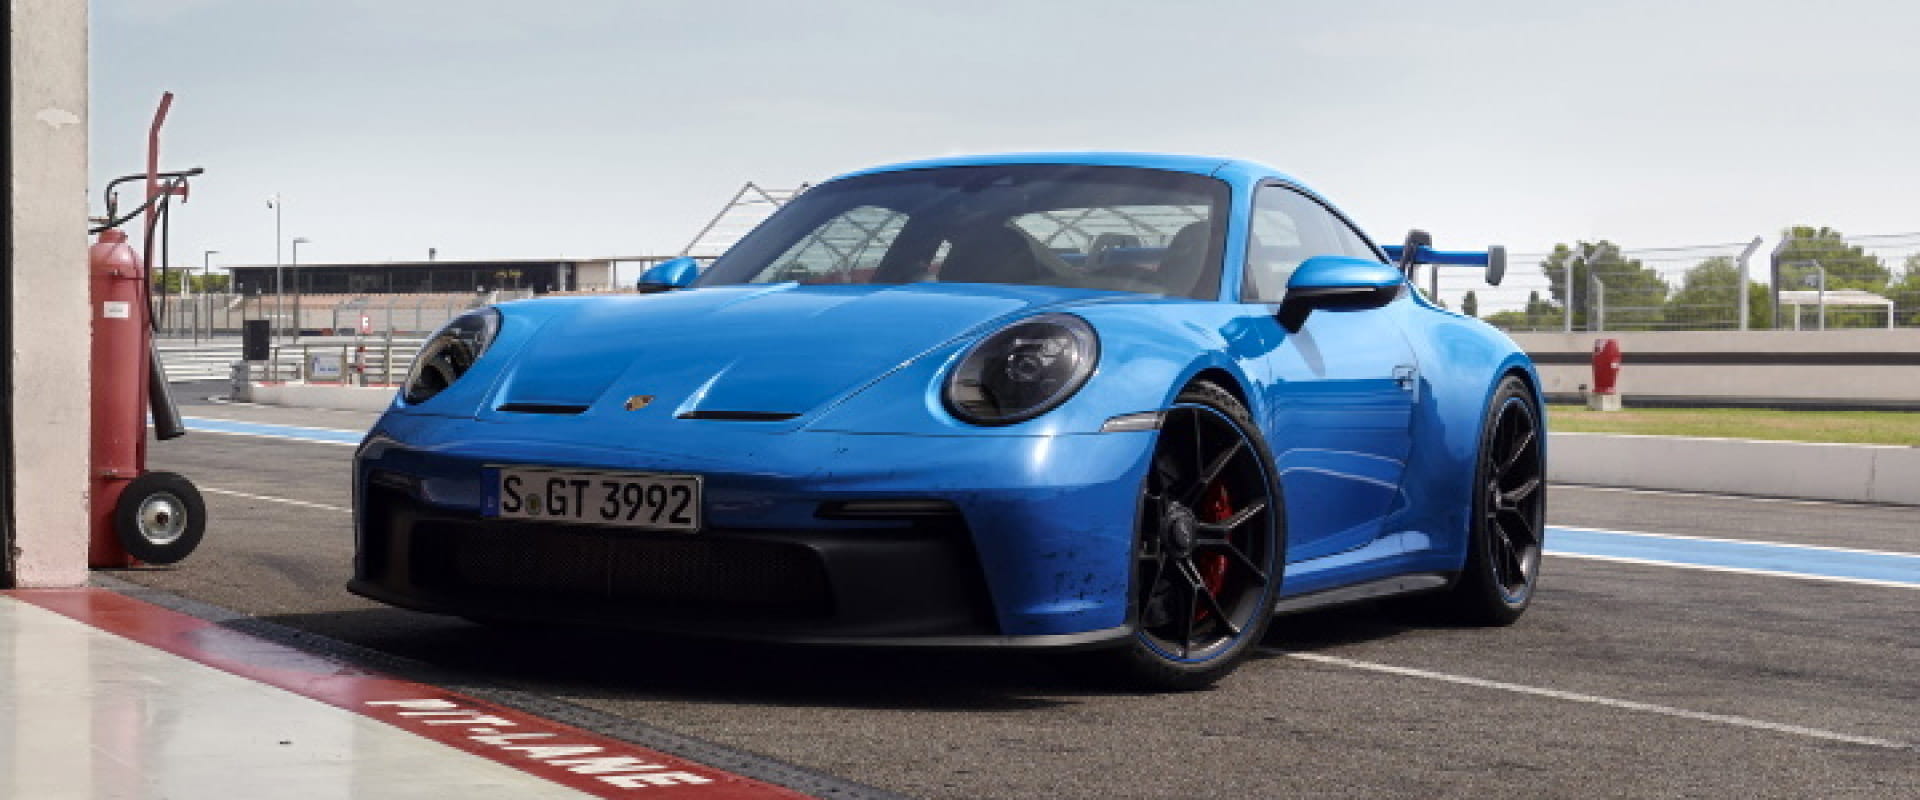 2022 Porsche 911 Updates and Pricing Revealed